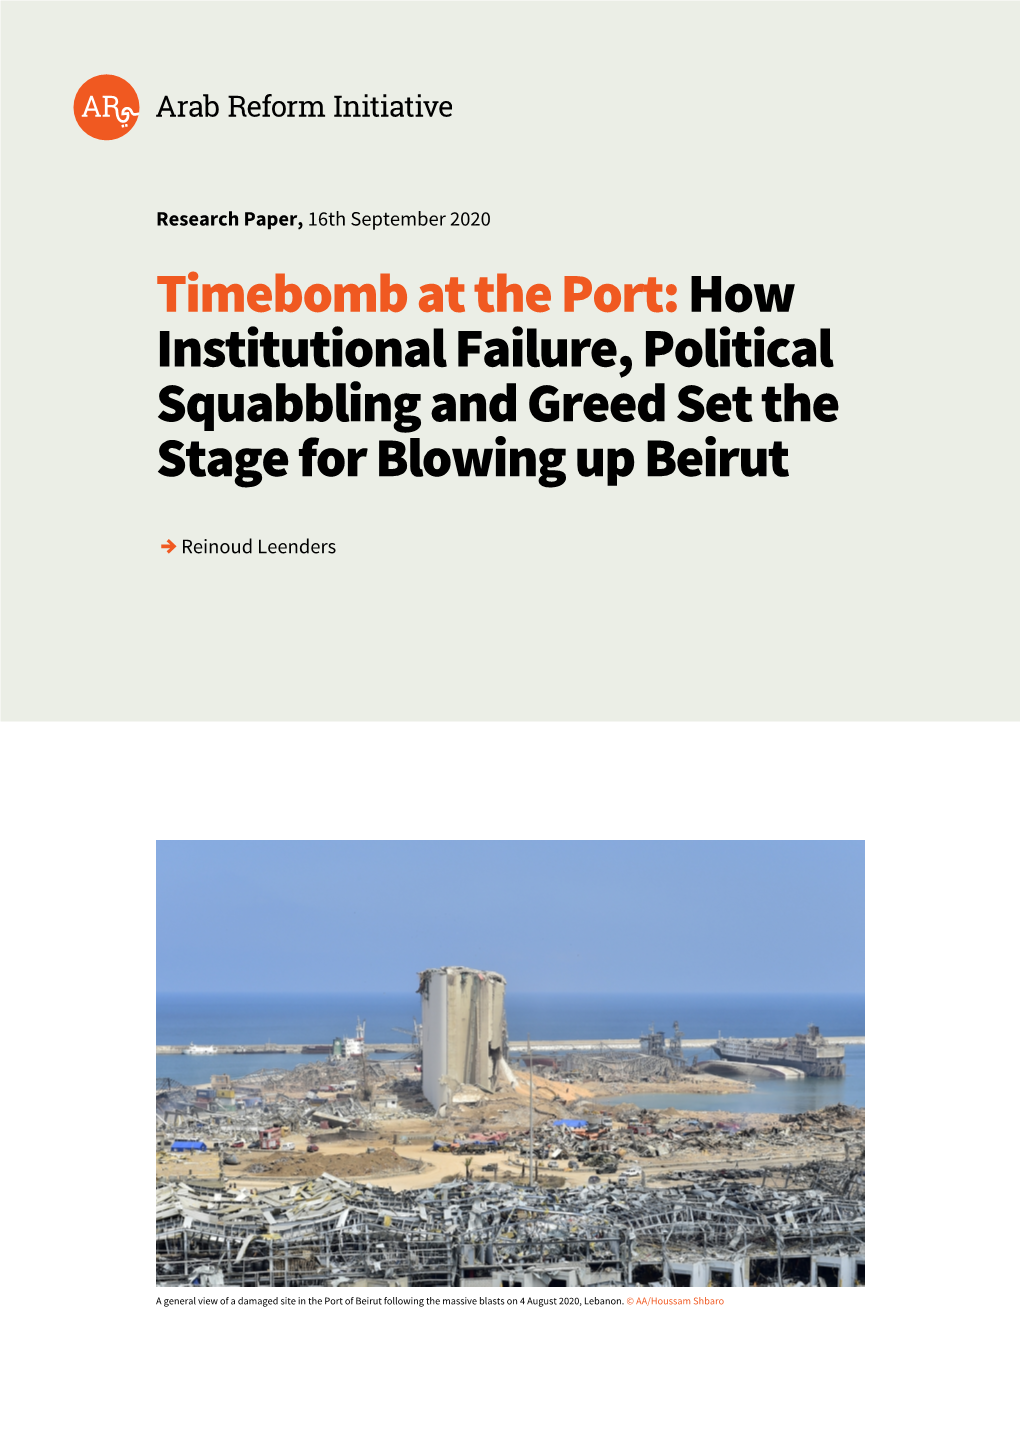 Timebomb at the Port: How Institutional Failure, Political Squabbling and Greed Set the Stage for Blowing up Beirut